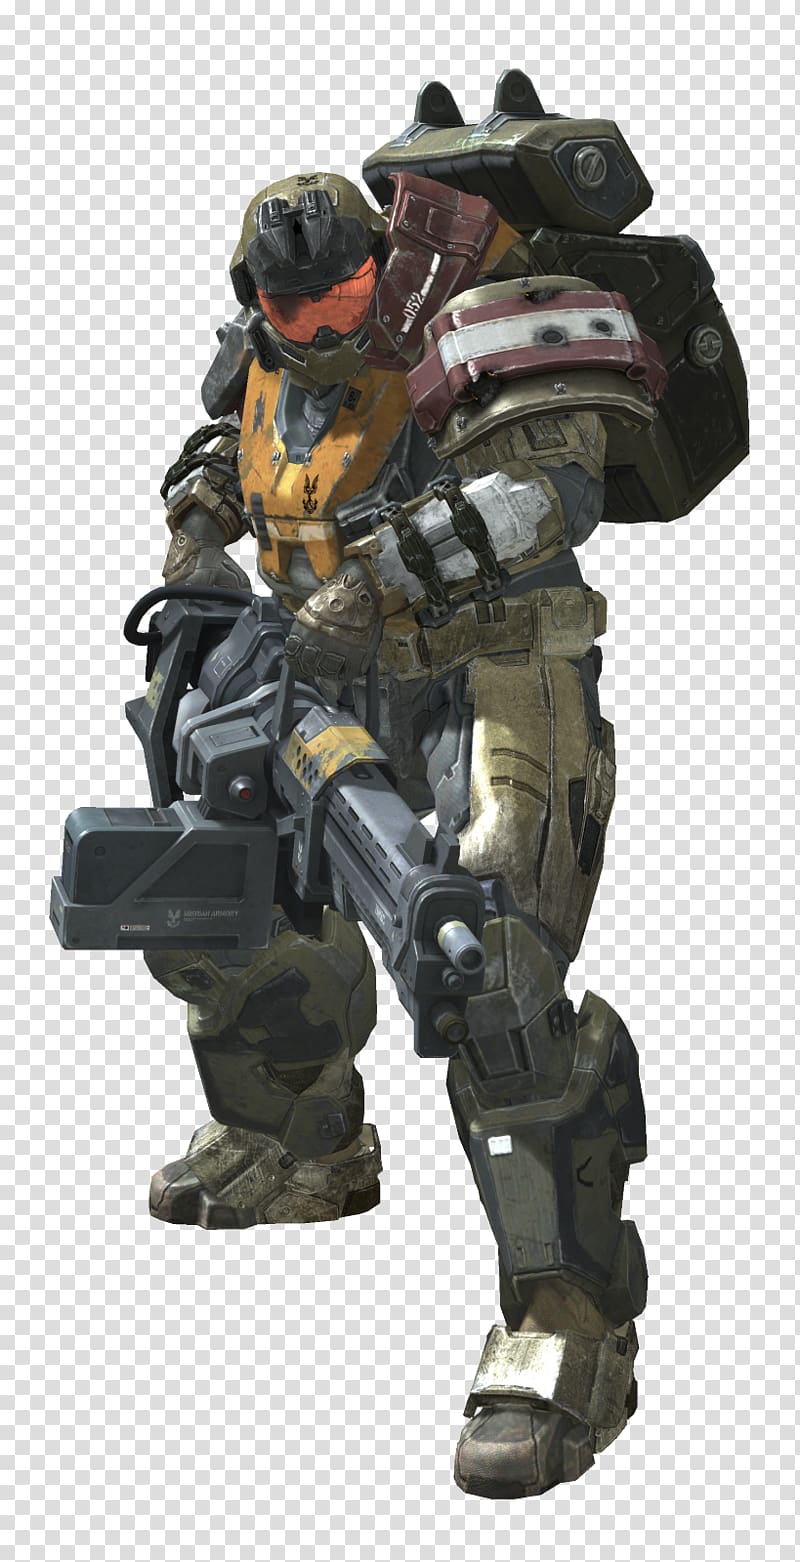 Halo: Reach Halo 2 Halo: Combat Evolved Xbox 360 Halo 3: ODST, others transparent background PNG clipart